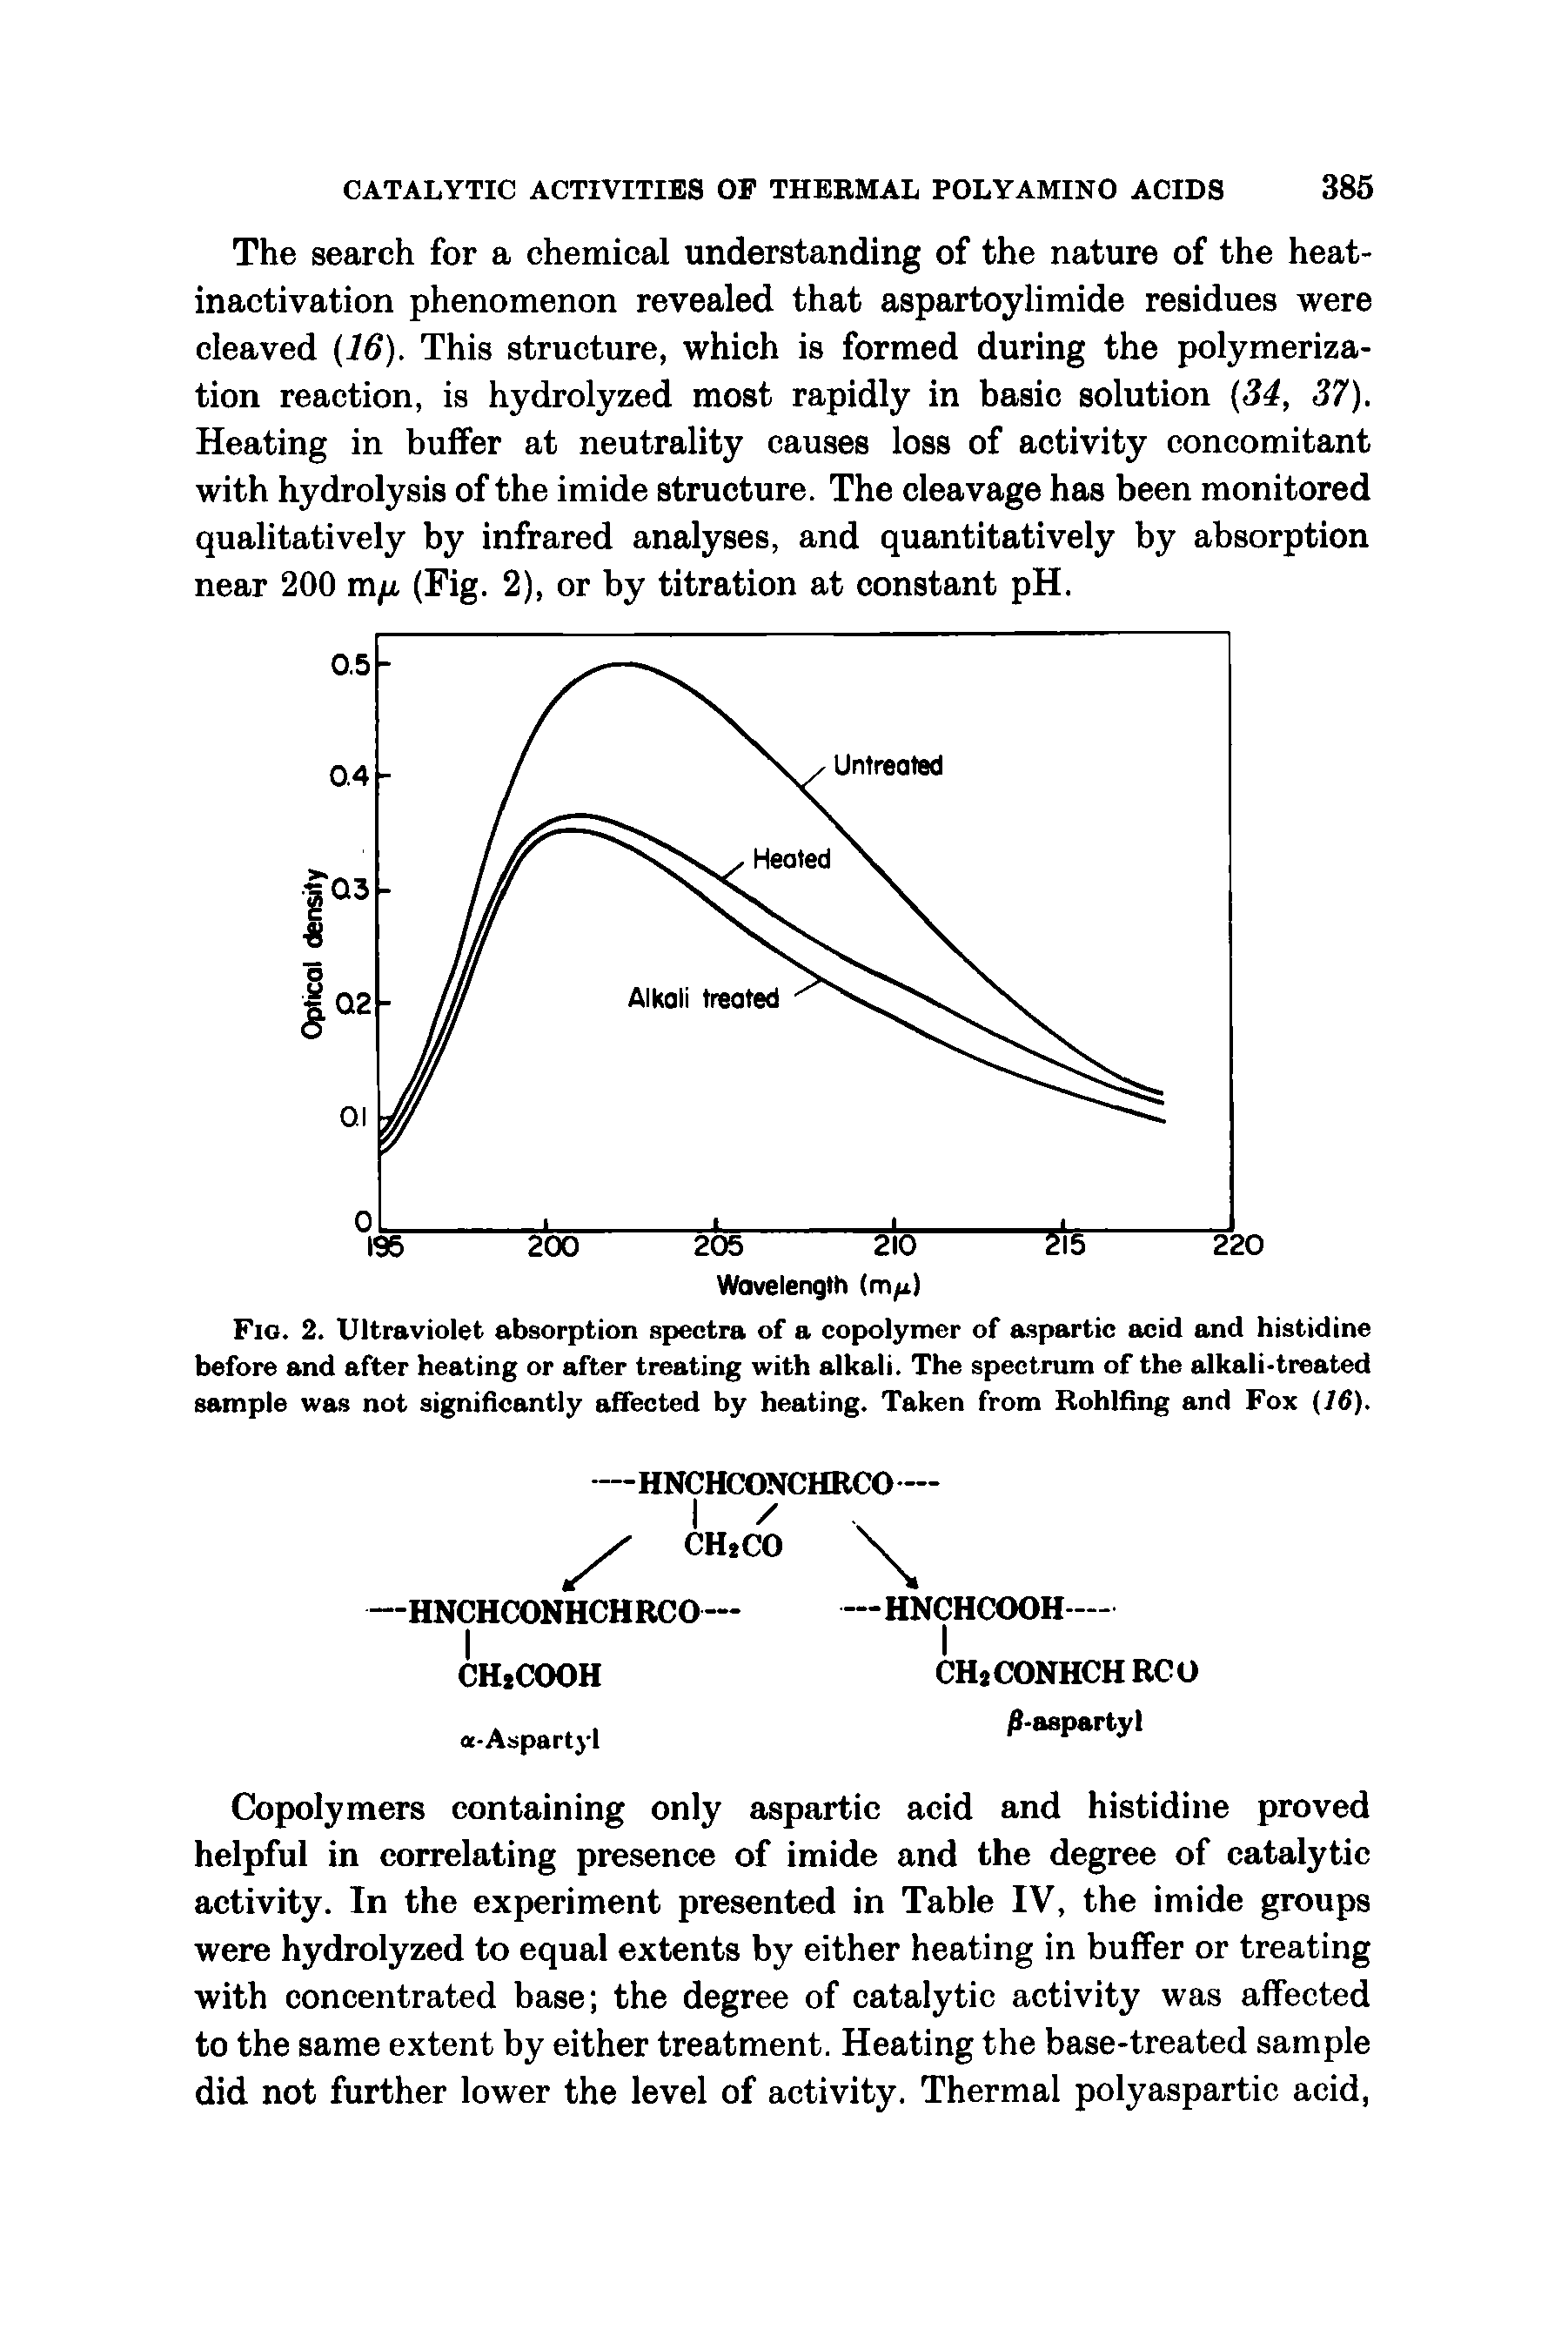 Fig. 2. Ultraviolet absorption spectra of a copolymer of aspartic acid and histidine before and after heating or after treating with alkali. The spectrum of the alkali-treated sample was not significantly affected by heating. Taken from Rohlfing and Fox (16).